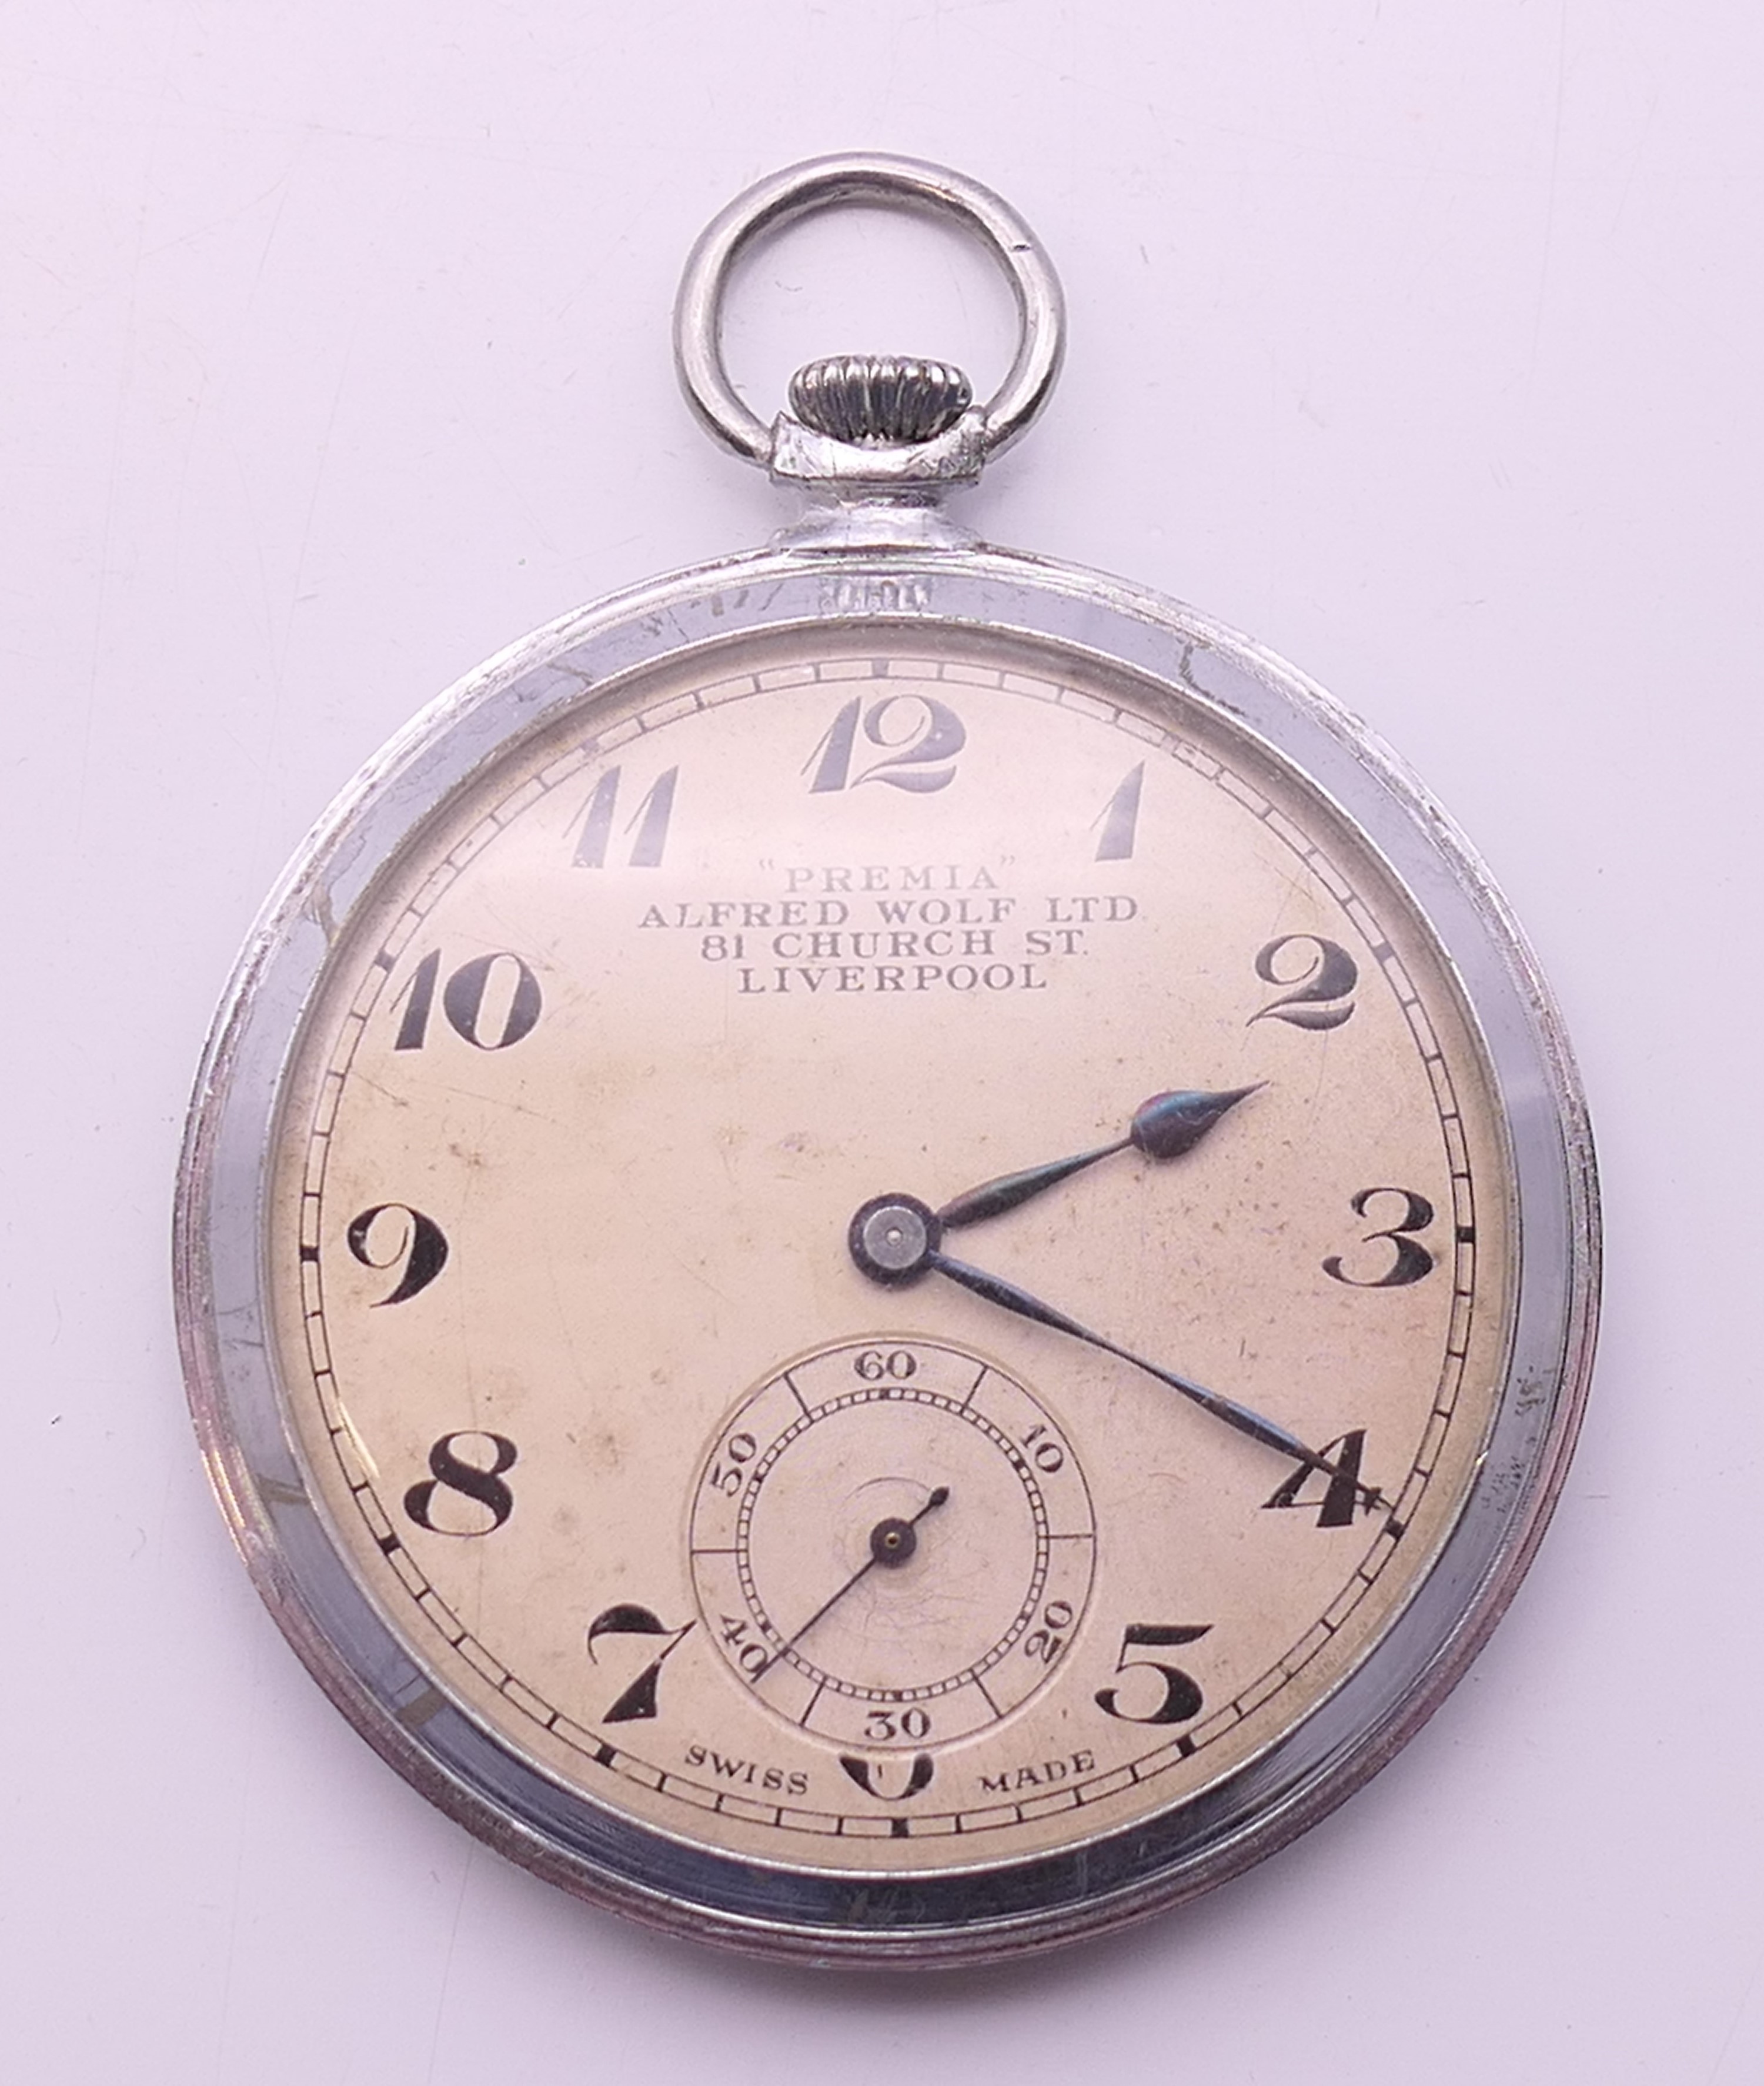 Two Art Deco gentleman's pocket watches, one marked Luxor, the other marked Premia Alfred Wolf Ltd, - Image 7 of 23